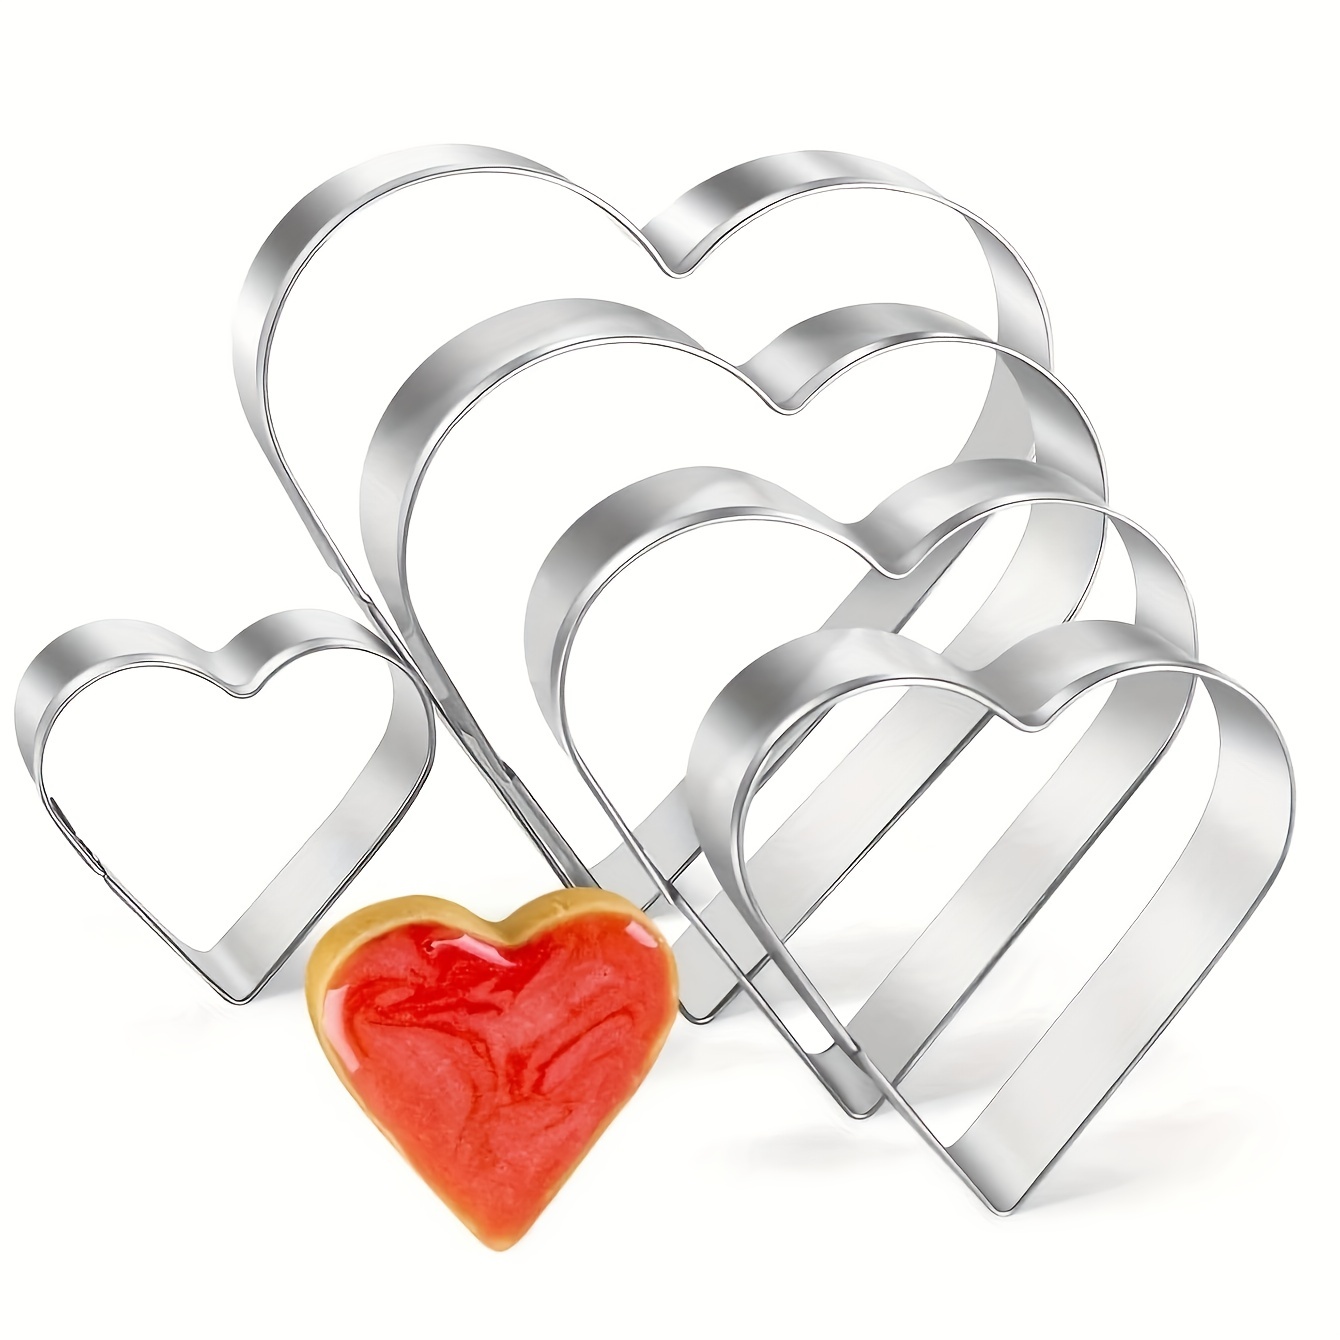 Heart Shape Cookie Cutter Set - 6 Pieces Valentine's Day Gift Stainless Steel Biscuit Pastry Cutters, Silver